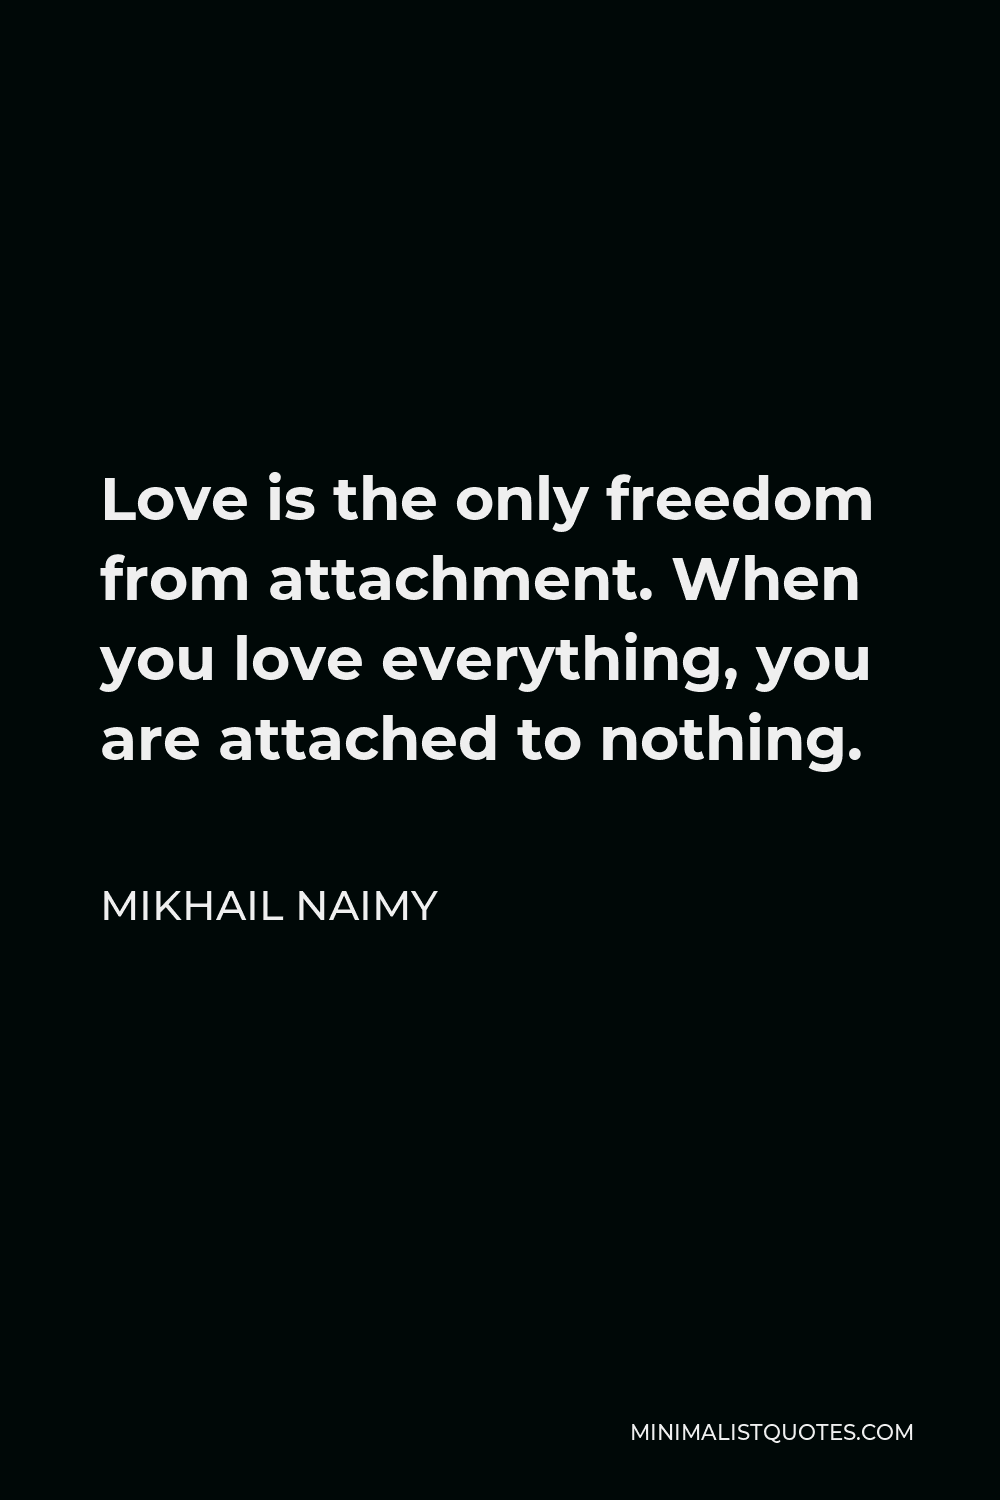 Mikhail Naimy Quote - Love is the only freedom from attachment. When you love everything, you are attached to nothing.